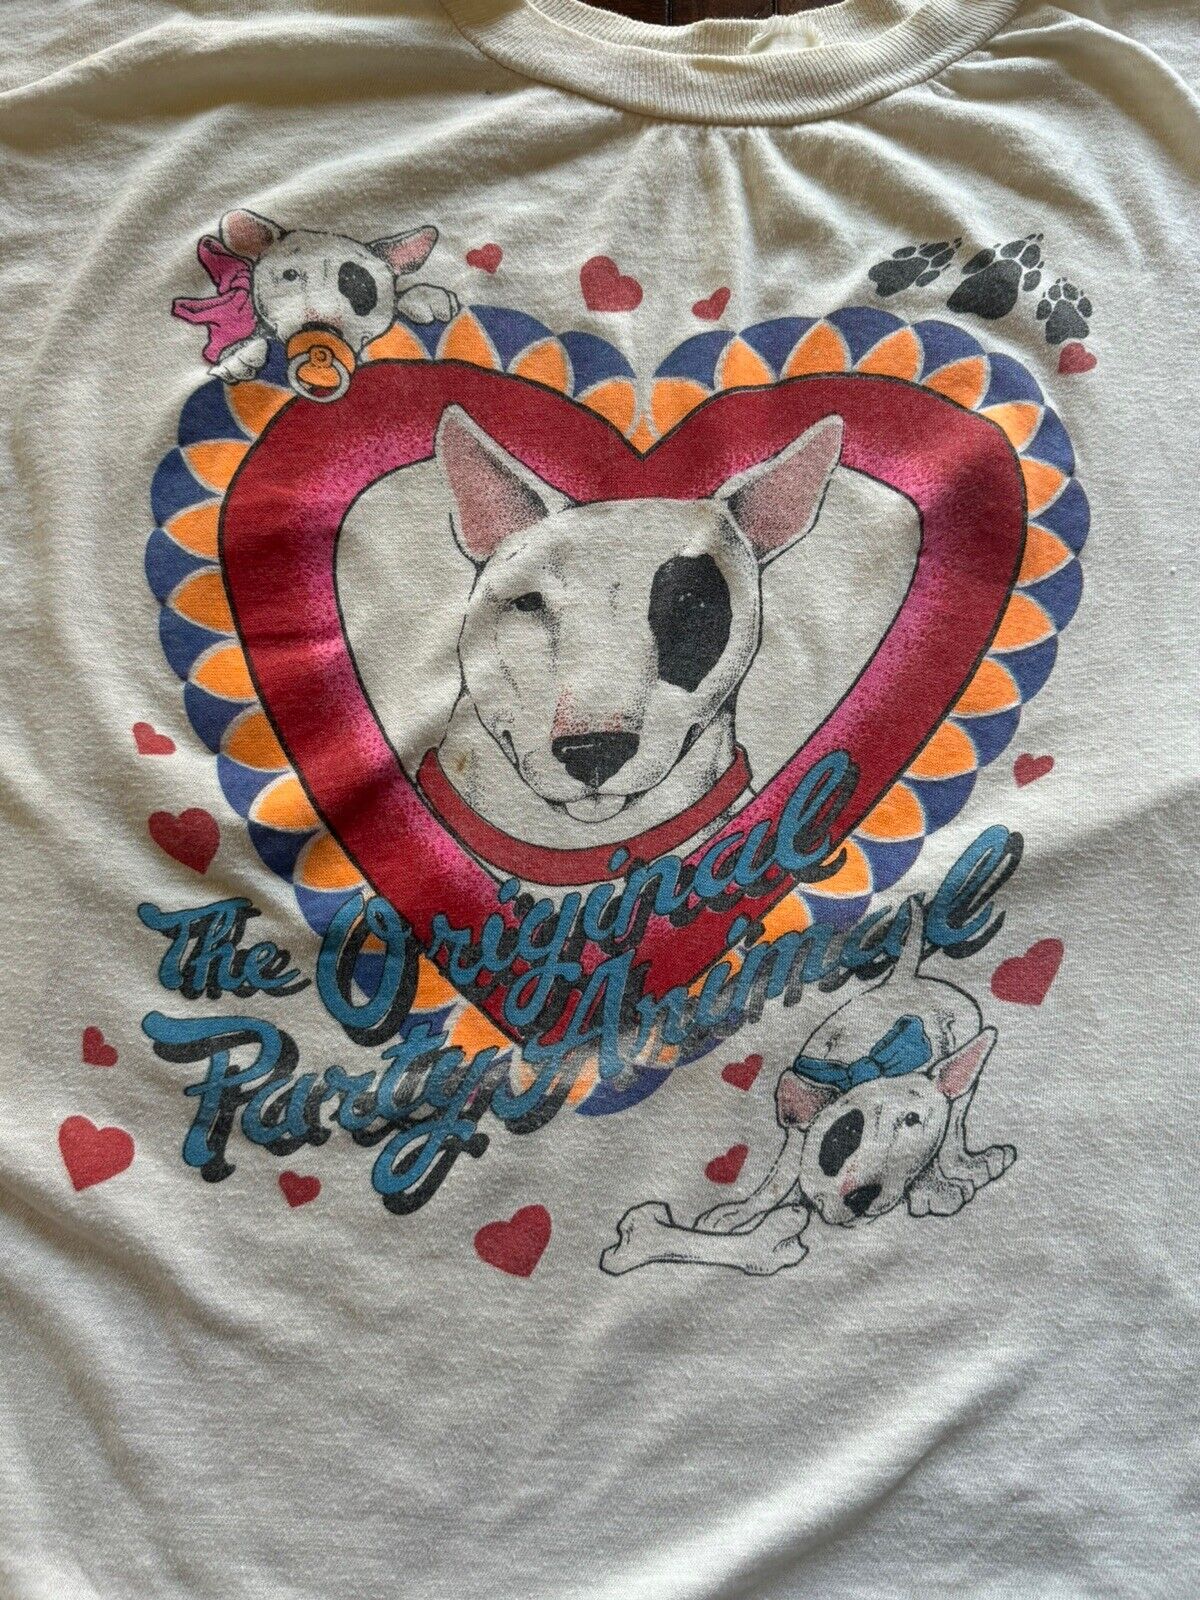 Vtg. 80’s Spuds MacKenzie “The Original Party Animal” w/PUPS  T-Shirt Size M VGC